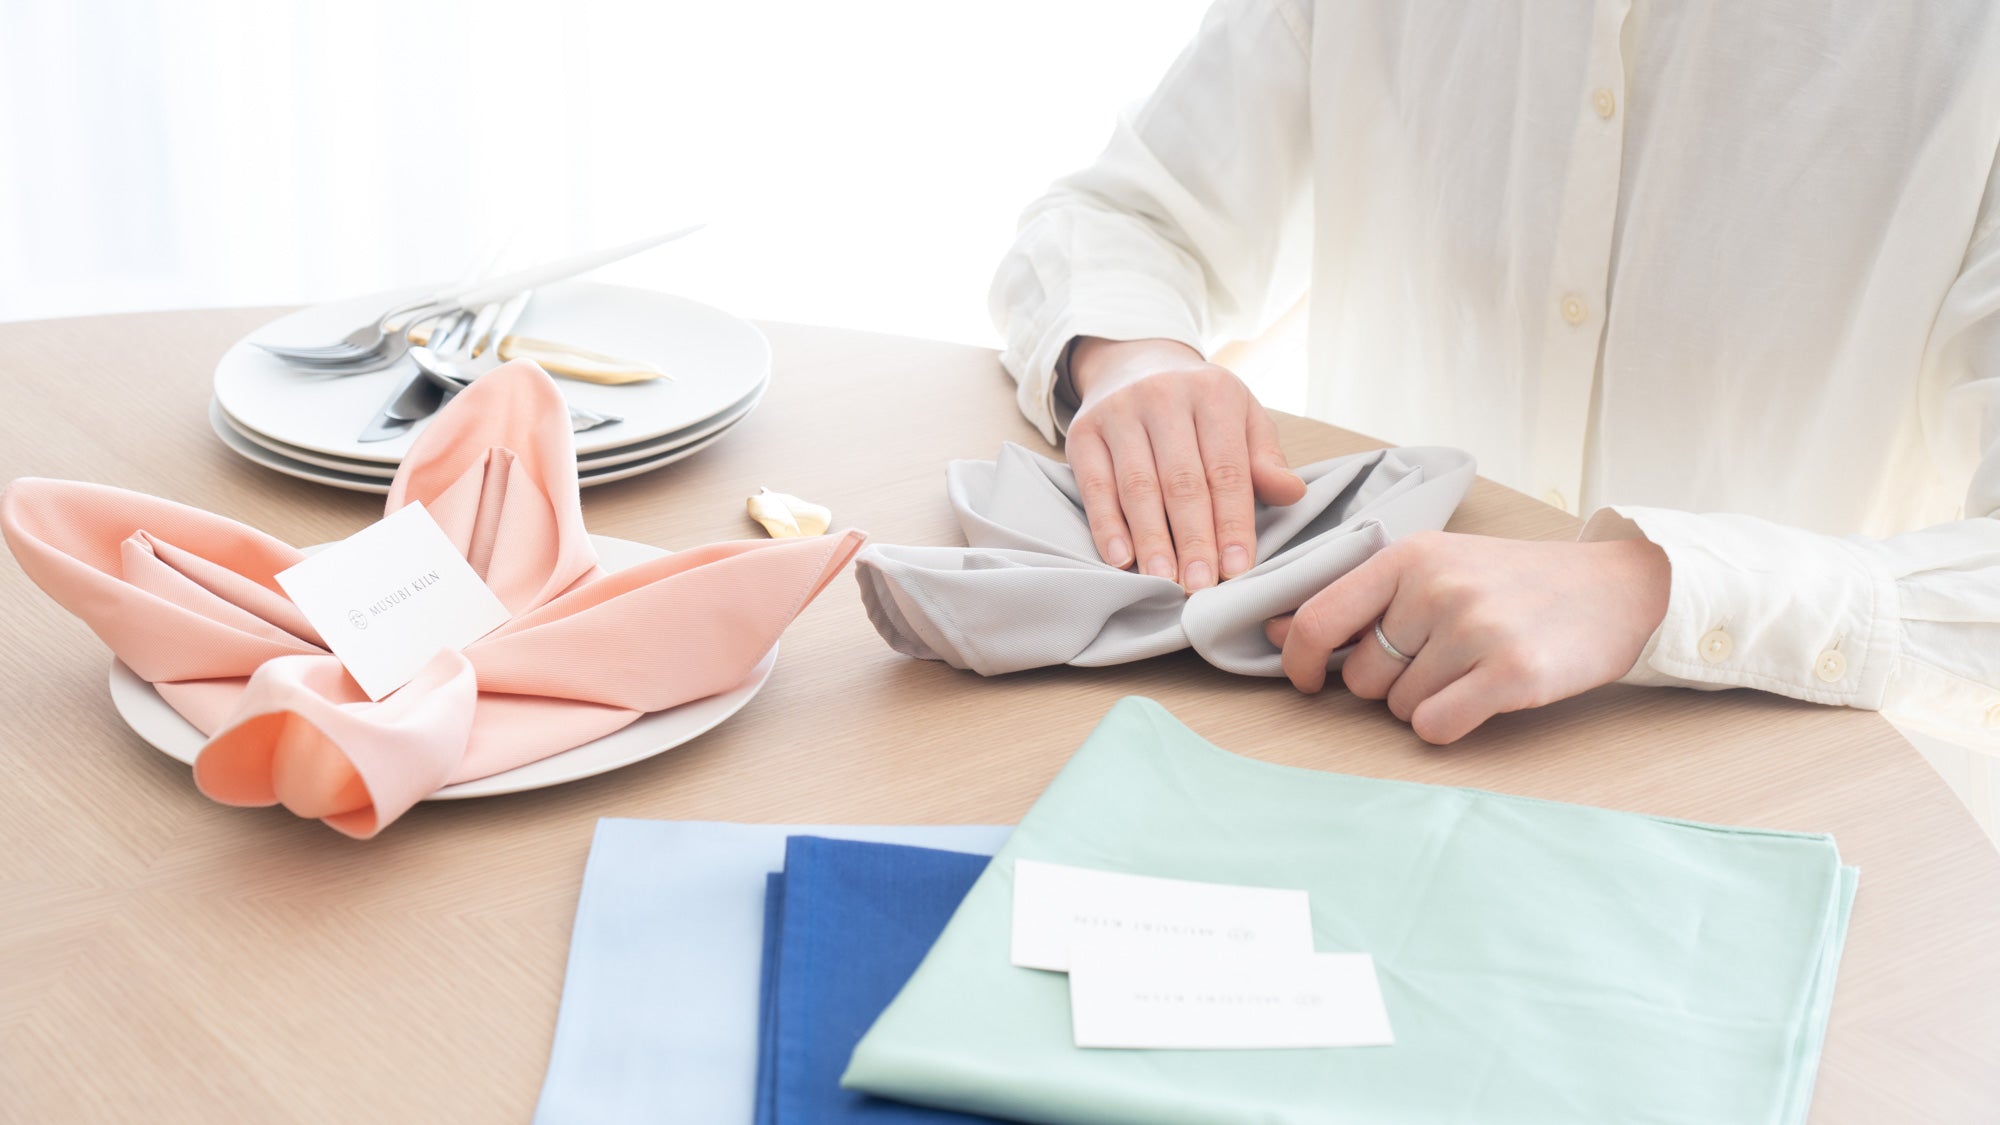 How to Fold Cloth Napkins Four Different Ways